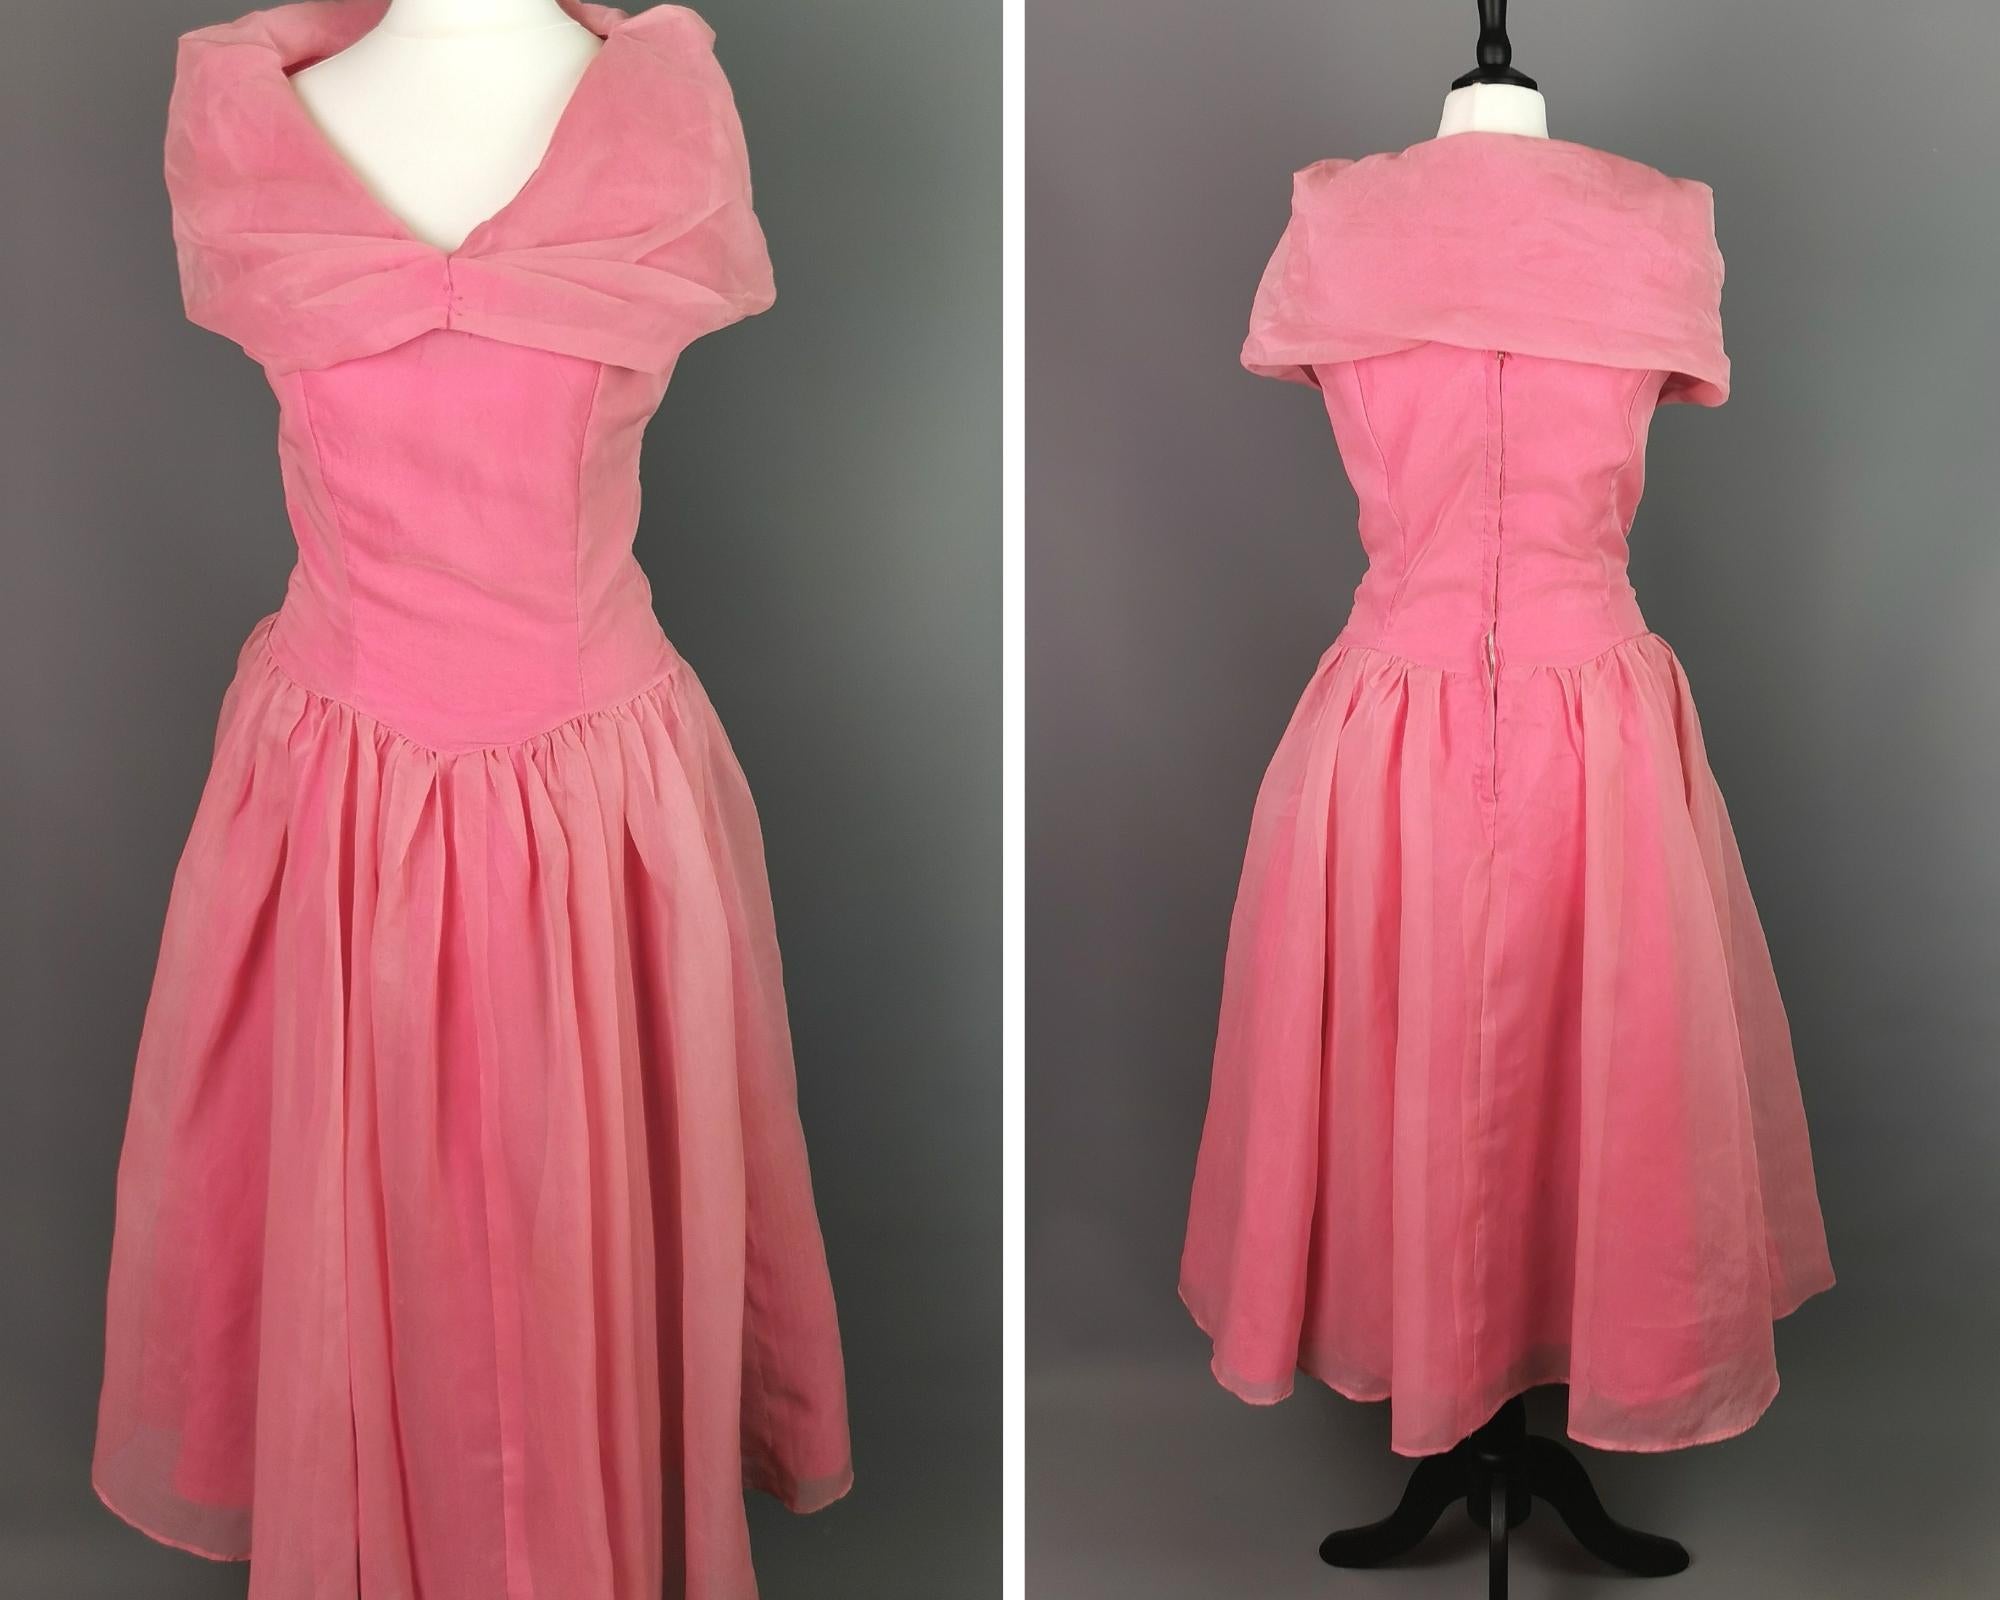 A gorgeous vintage 1950s full skirt party dress in pink with a chiffon organza overlay.

The dress has multi layers including the original underskirt giving the skirt lots of volume, it flares out from the hip with a fitted bodice.

It is a